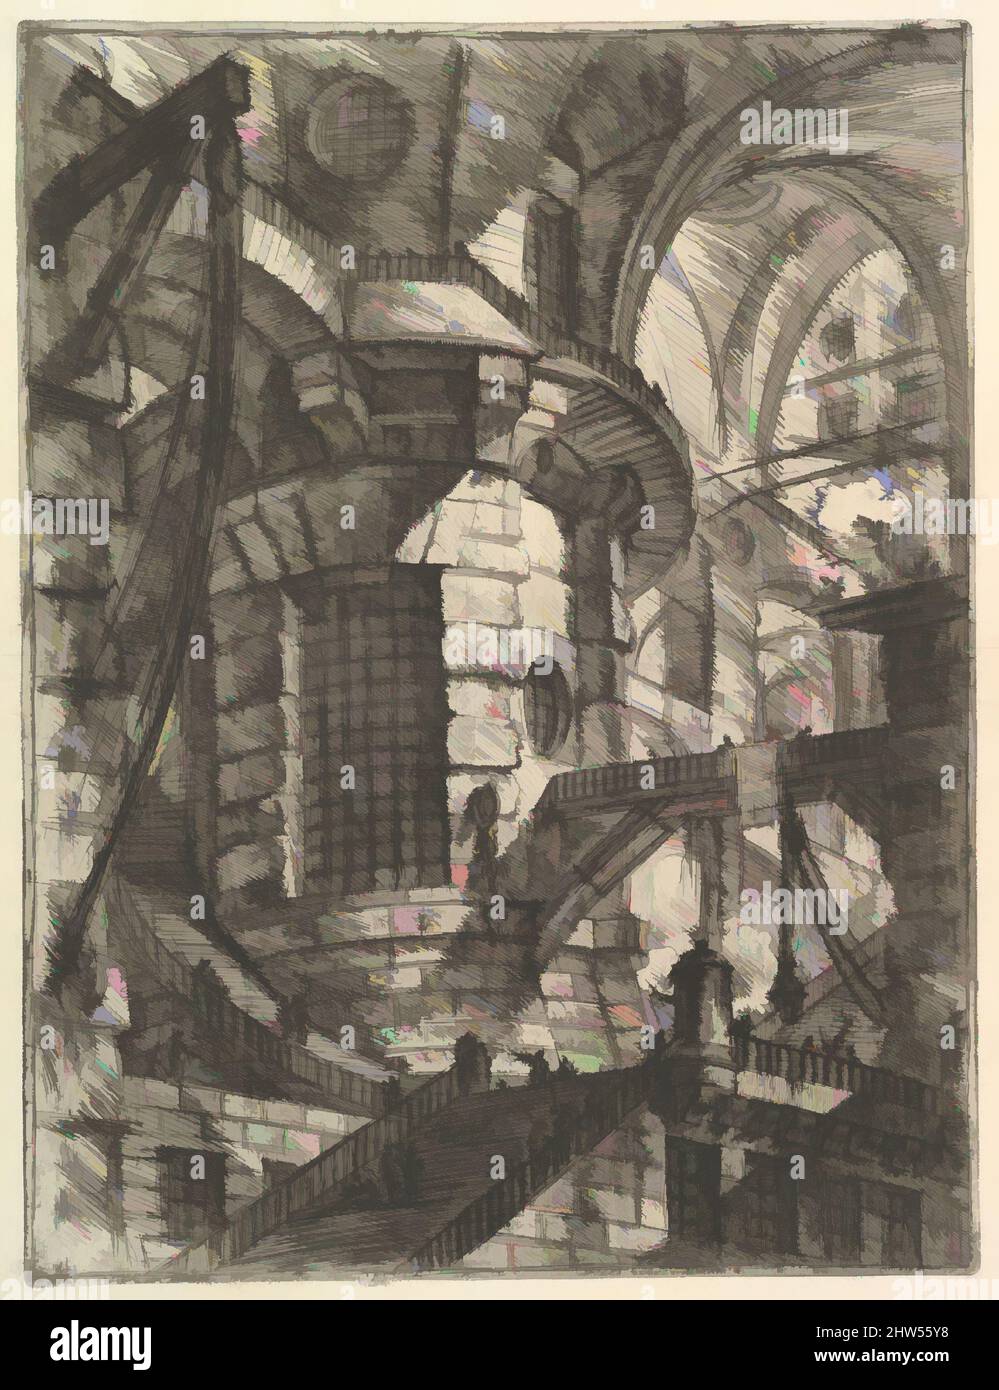 Art inspired by The Round Tower, from 'Carceri d'invenzione' (Imaginary Prisons), ca. 1749–50, Etching, engraving, sulphur tint or open bite, burnishing; first state of four (Robison), Sheet: 24 13/16 x 19 1/2 in. (63 x 49.5 cm), Prints, Giovanni Battista Piranesi (Italian, Mogliano, Classic works modernized by Artotop with a splash of modernity. Shapes, color and value, eye-catching visual impact on art. Emotions through freedom of artworks in a contemporary way. A timeless message pursuing a wildly creative new direction. Artists turning to the digital medium and creating the Artotop NFT Stock Photo